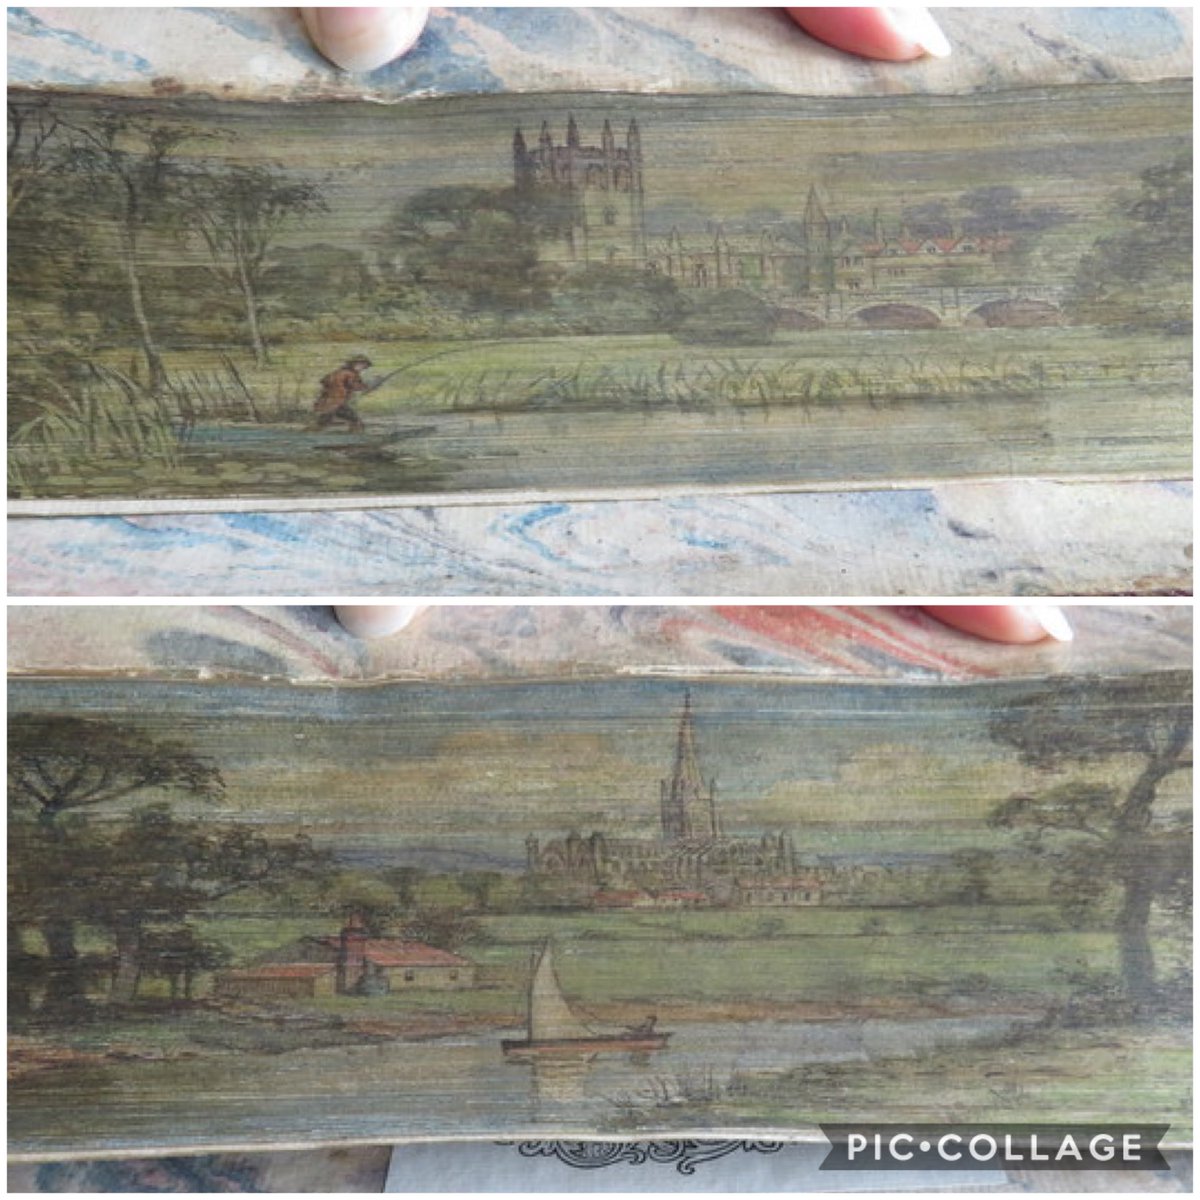 DOUBLE FORE EDGE PAINTING ~ COMMON PRAYER 1761 BASKERVILLE PRESS Bayntun BOX
FORE EDGE PAINTINGS * MAGDALEN OXFORD * NORWICH

#books #antiquarian #CommonPrayer #Christian #BaskervillePress #foreedge #bookdecoration #Norwich #Oxford #painting #auction 
bit.ly/336XkYK